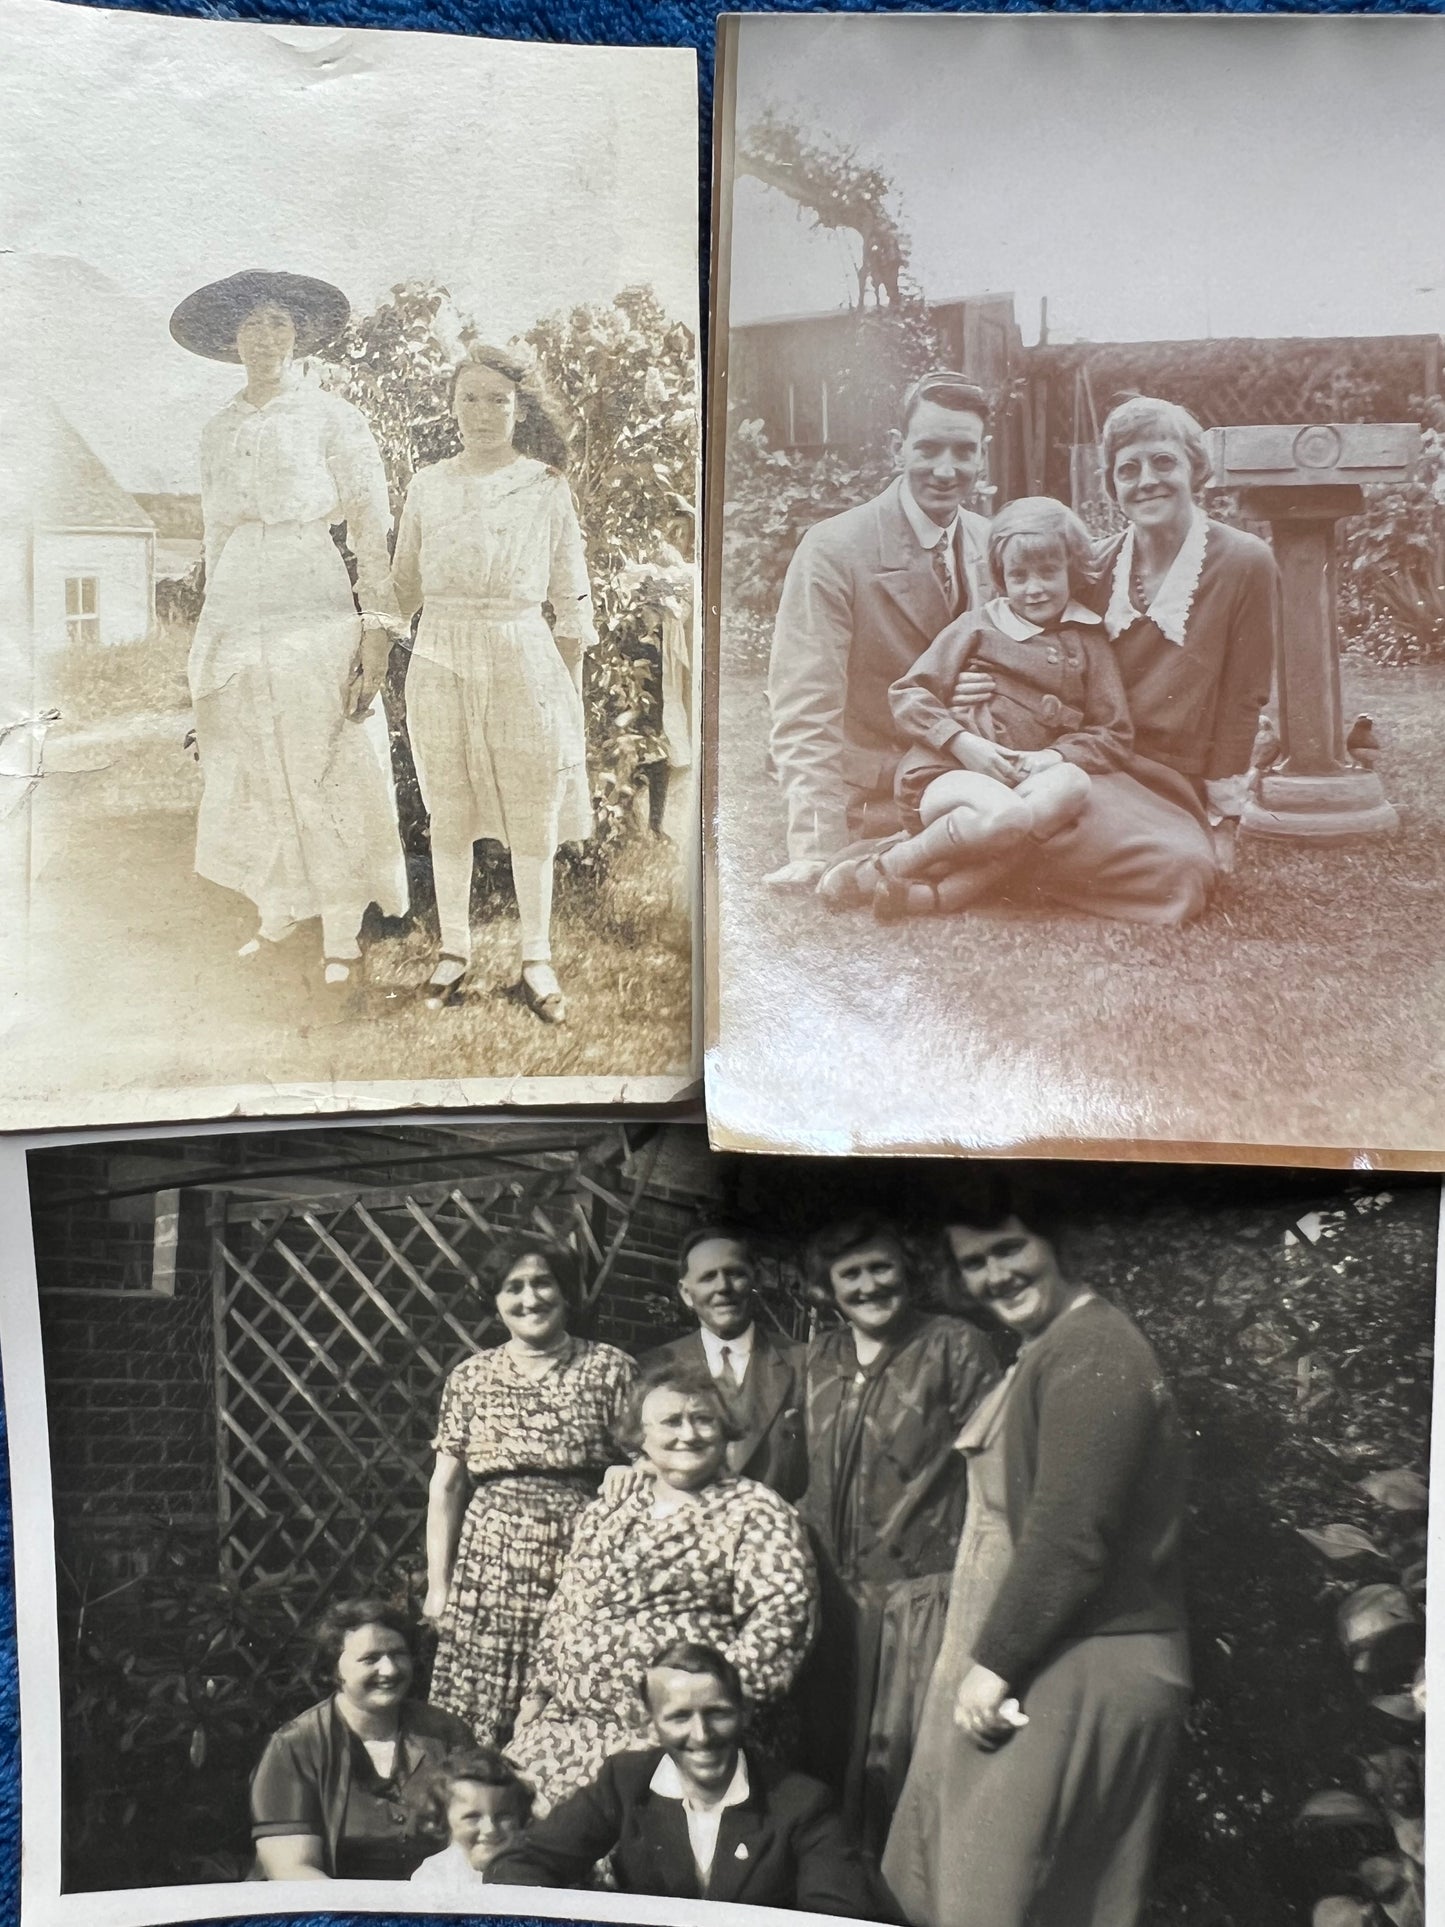 12 Old Photos of People in Their Gardens 1920s - 50s (E11)